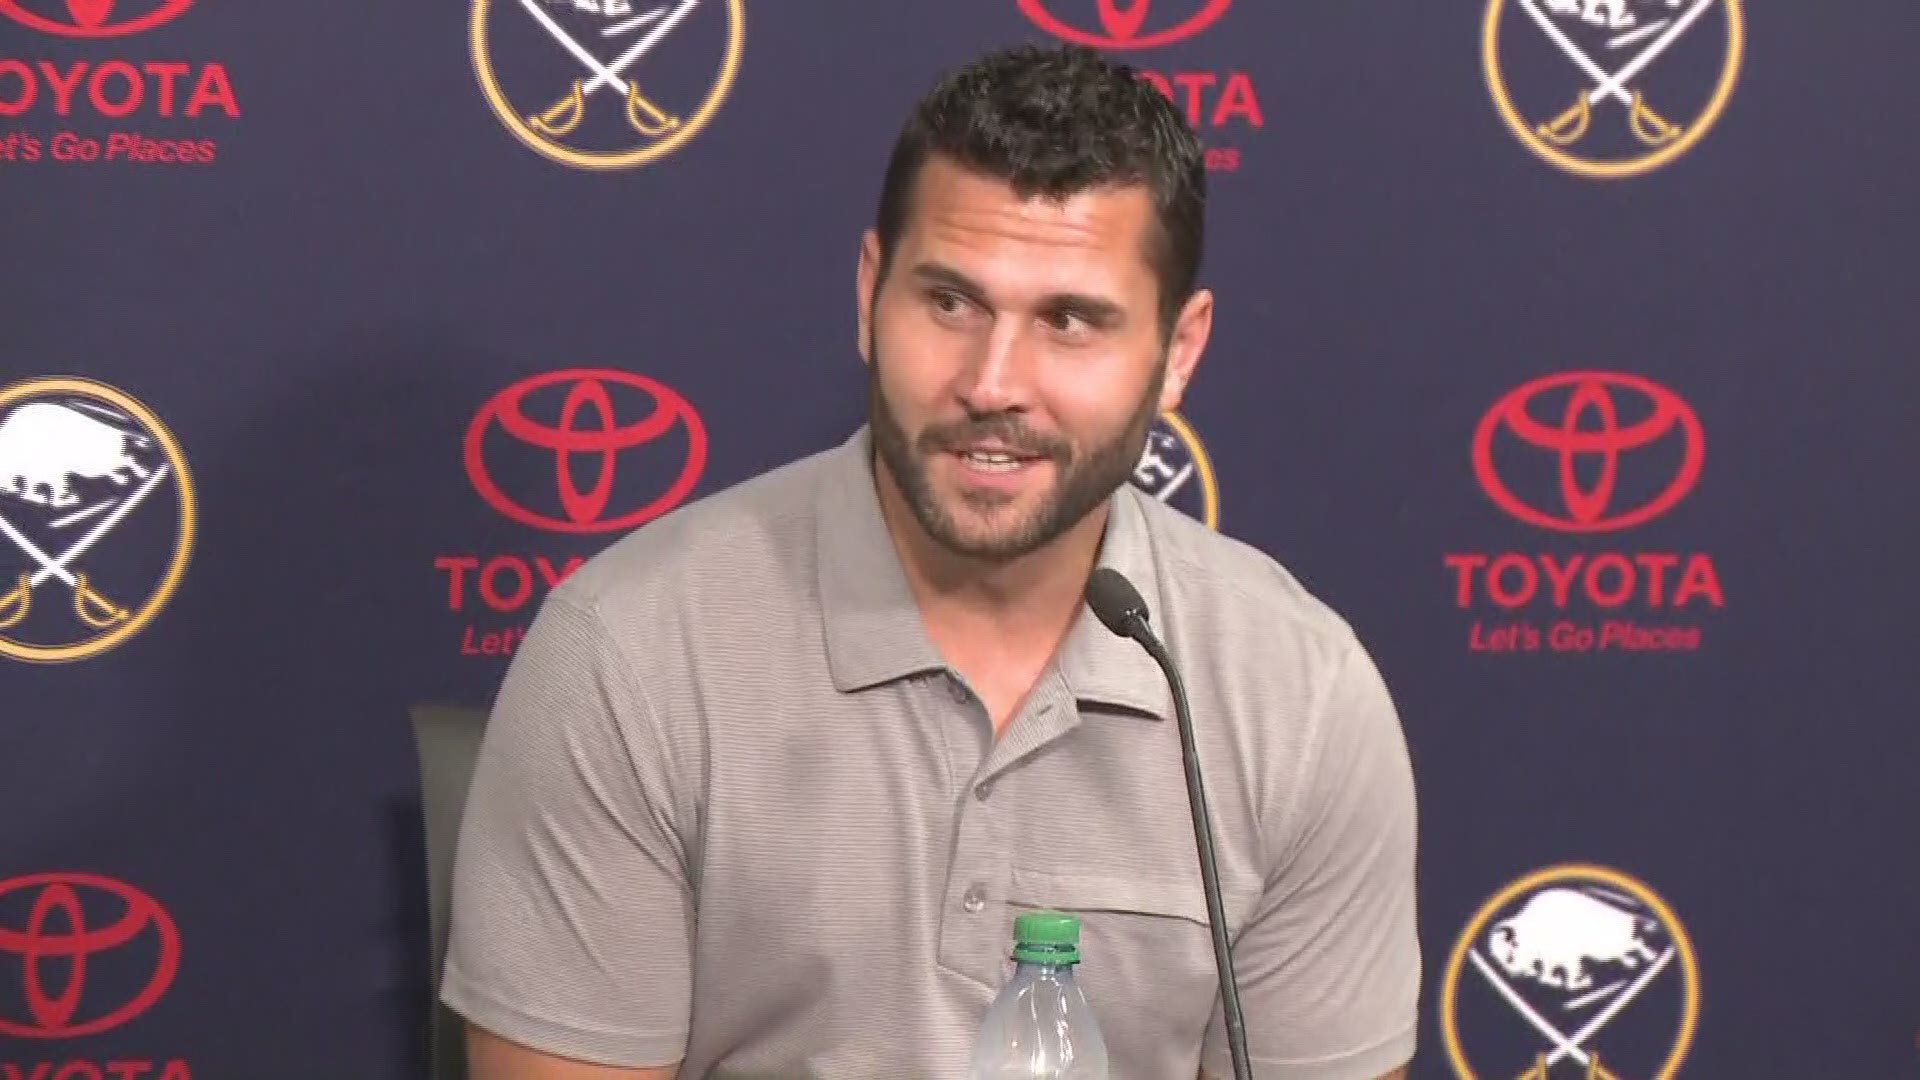 NHLer Brian Gionta announces his retirement from hockey.